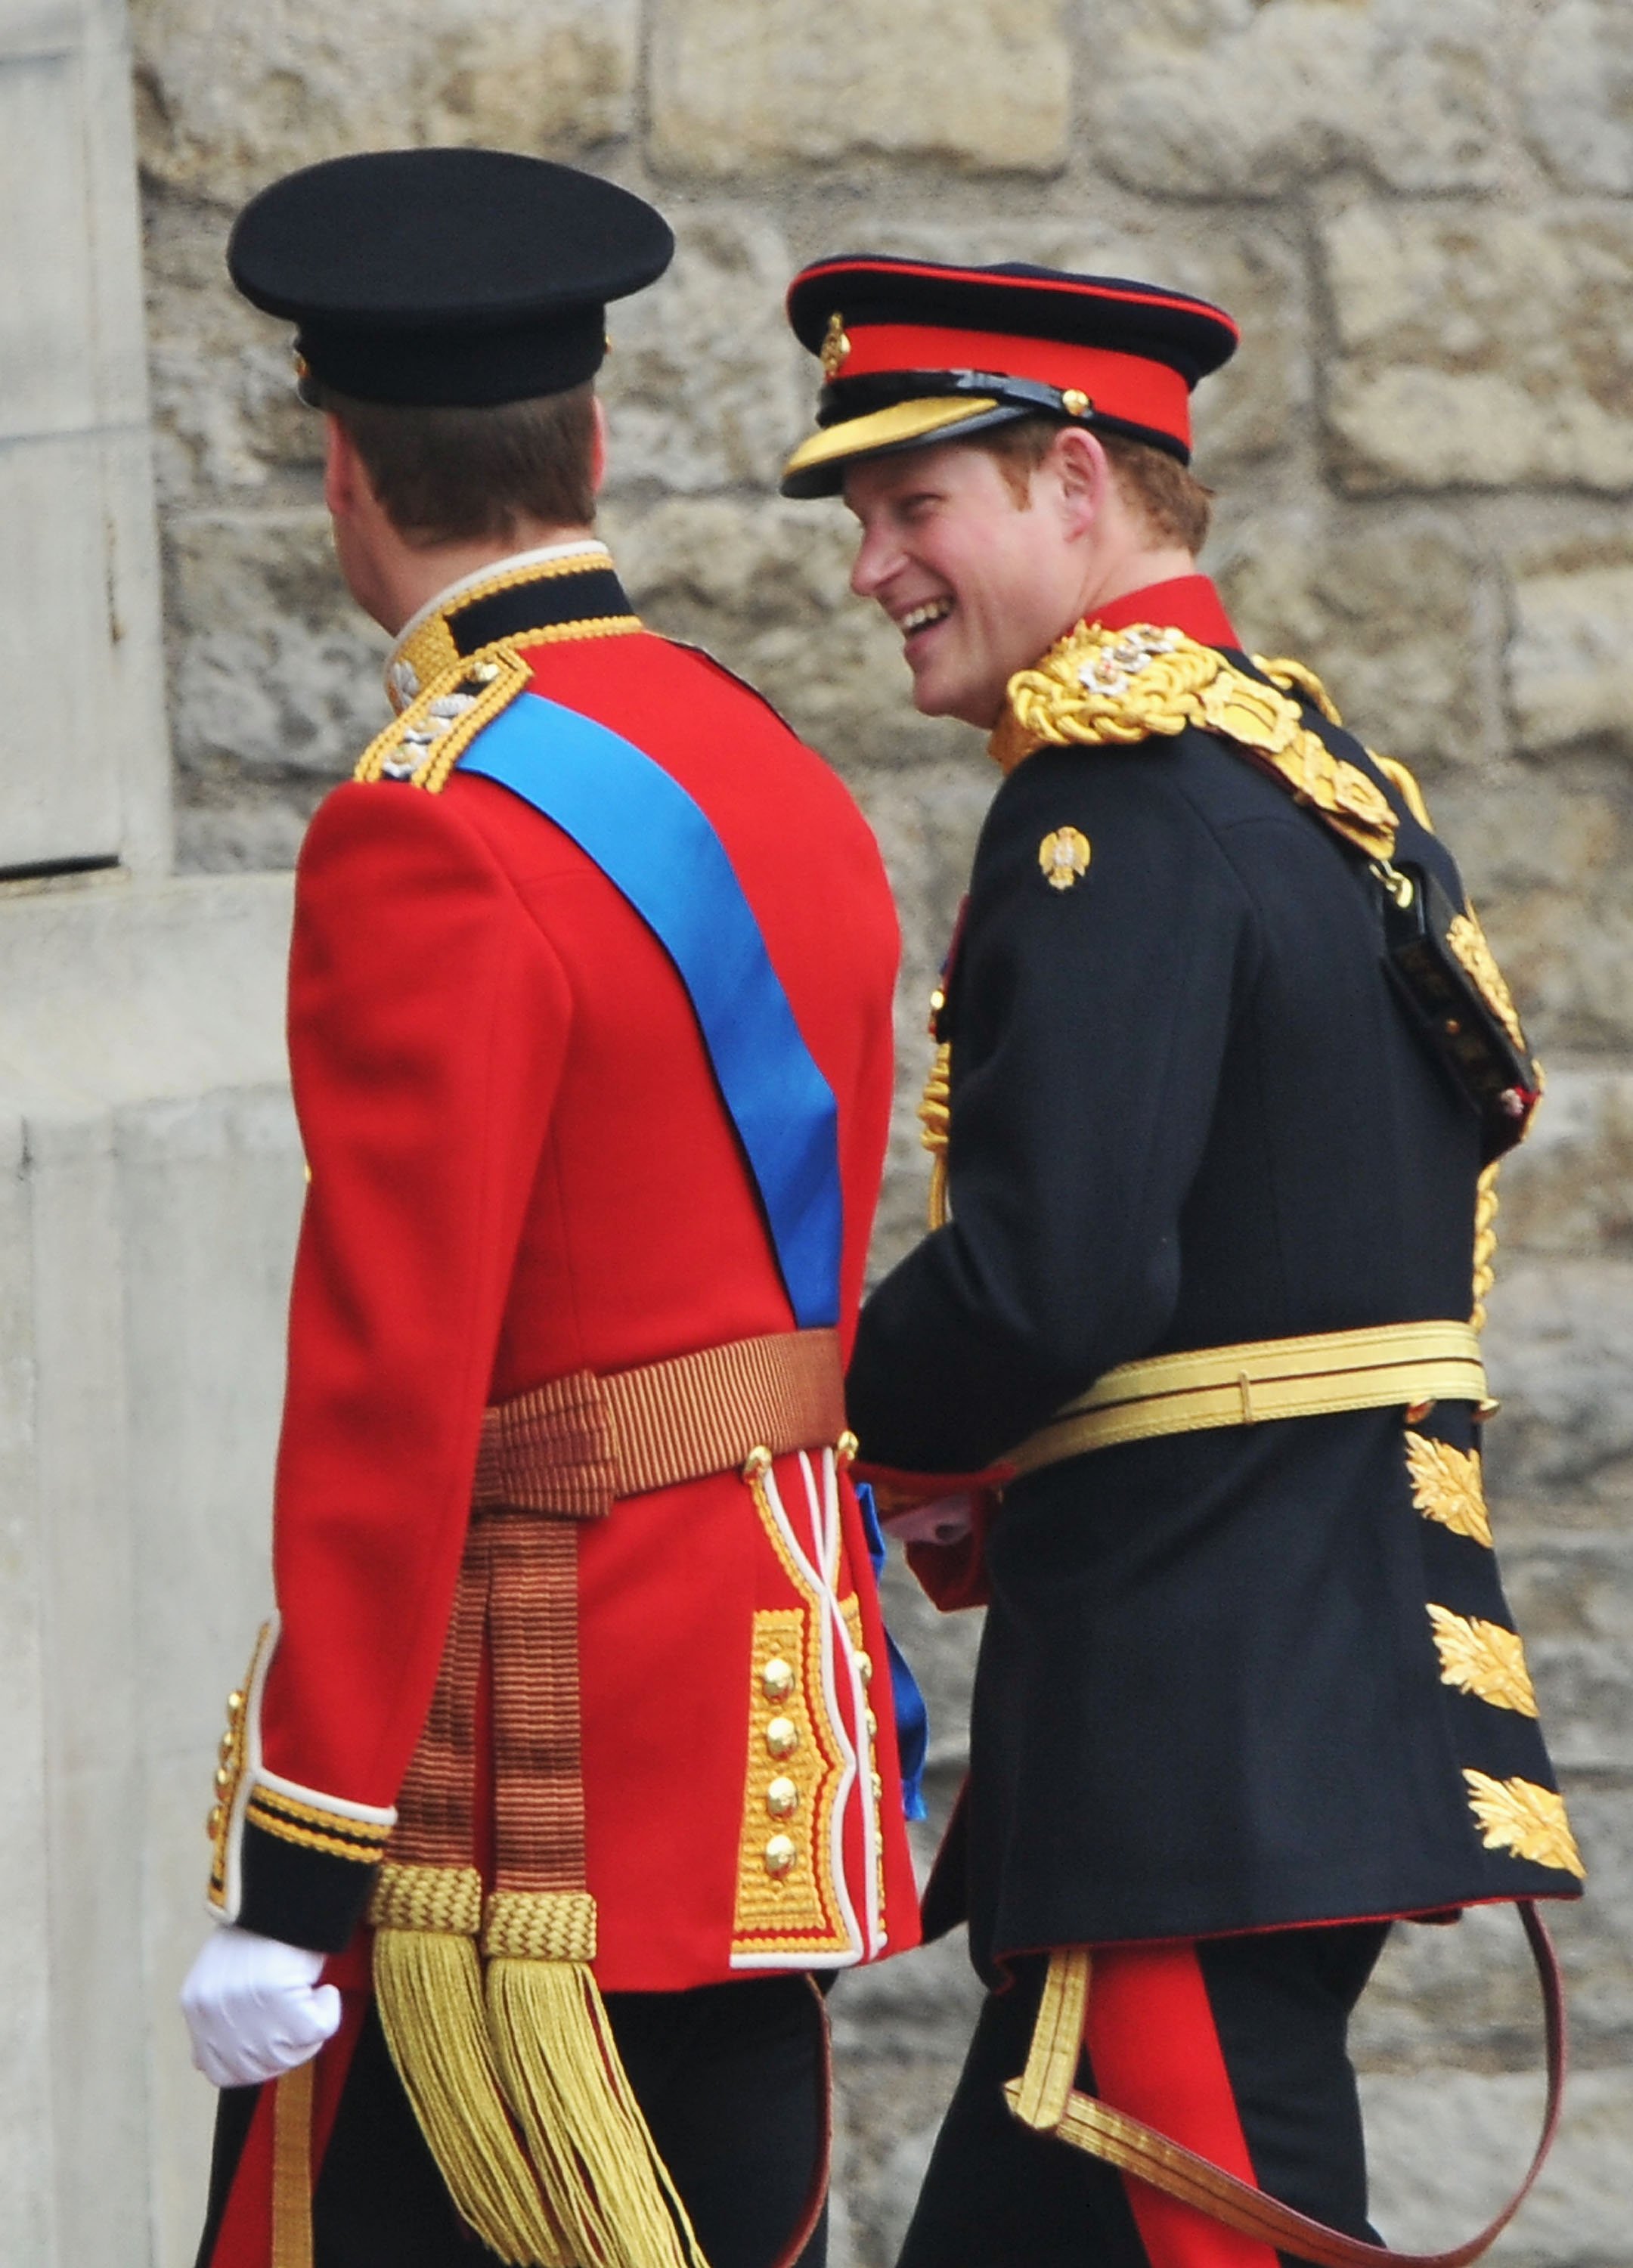 Prince William and Prince Harry share a joke as they arrive to Westminster Abbey for William's wedding to Kate Middleton